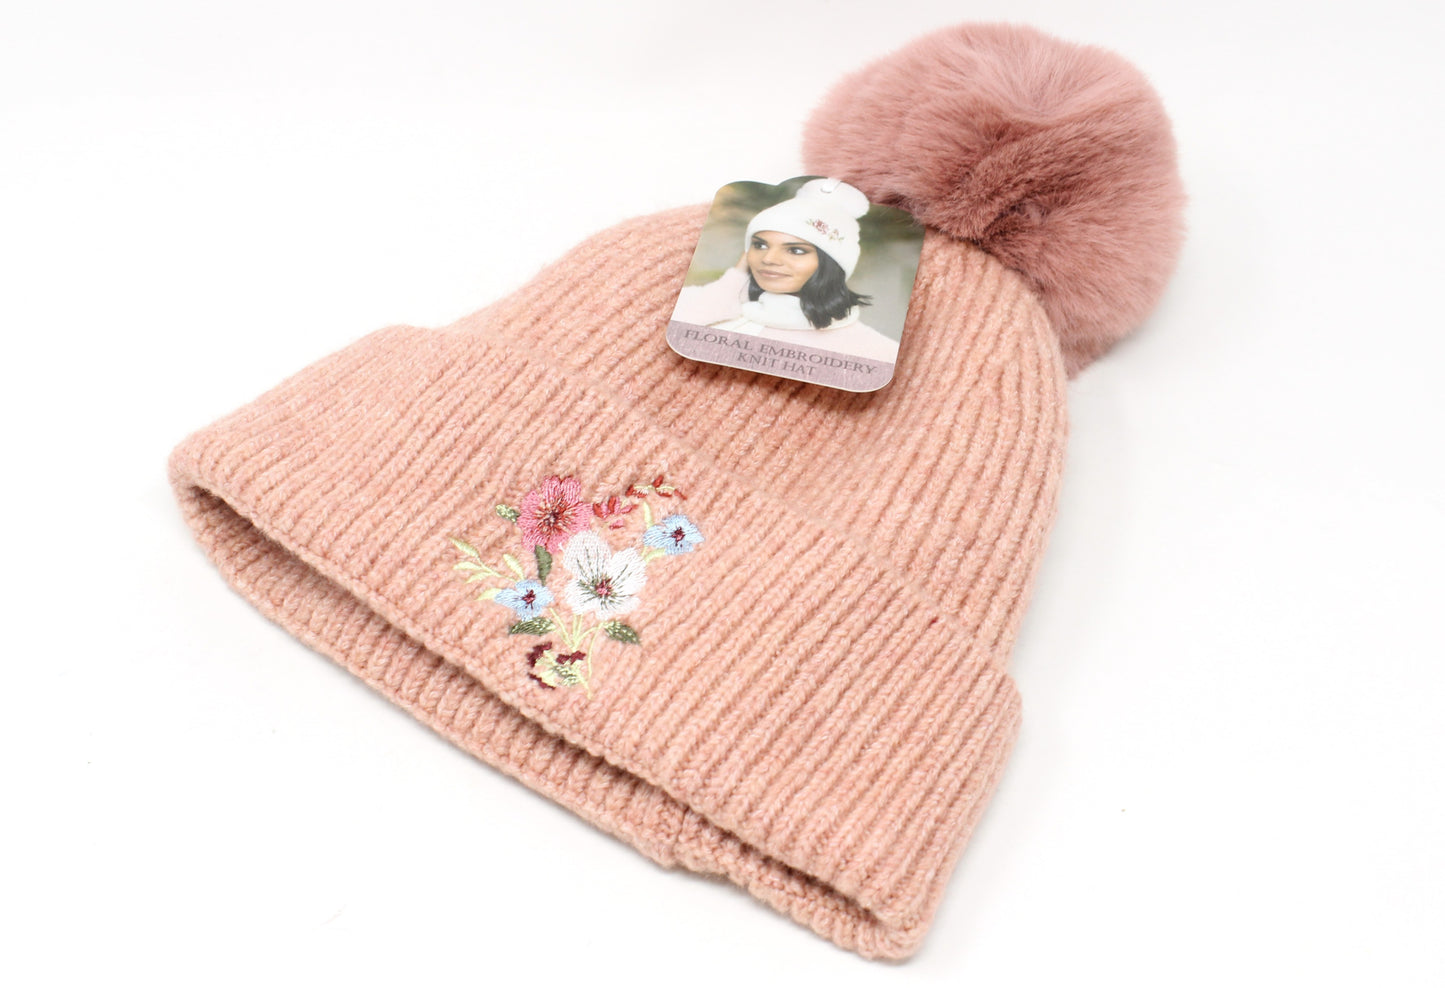 Floral Embroidery Knit Hat